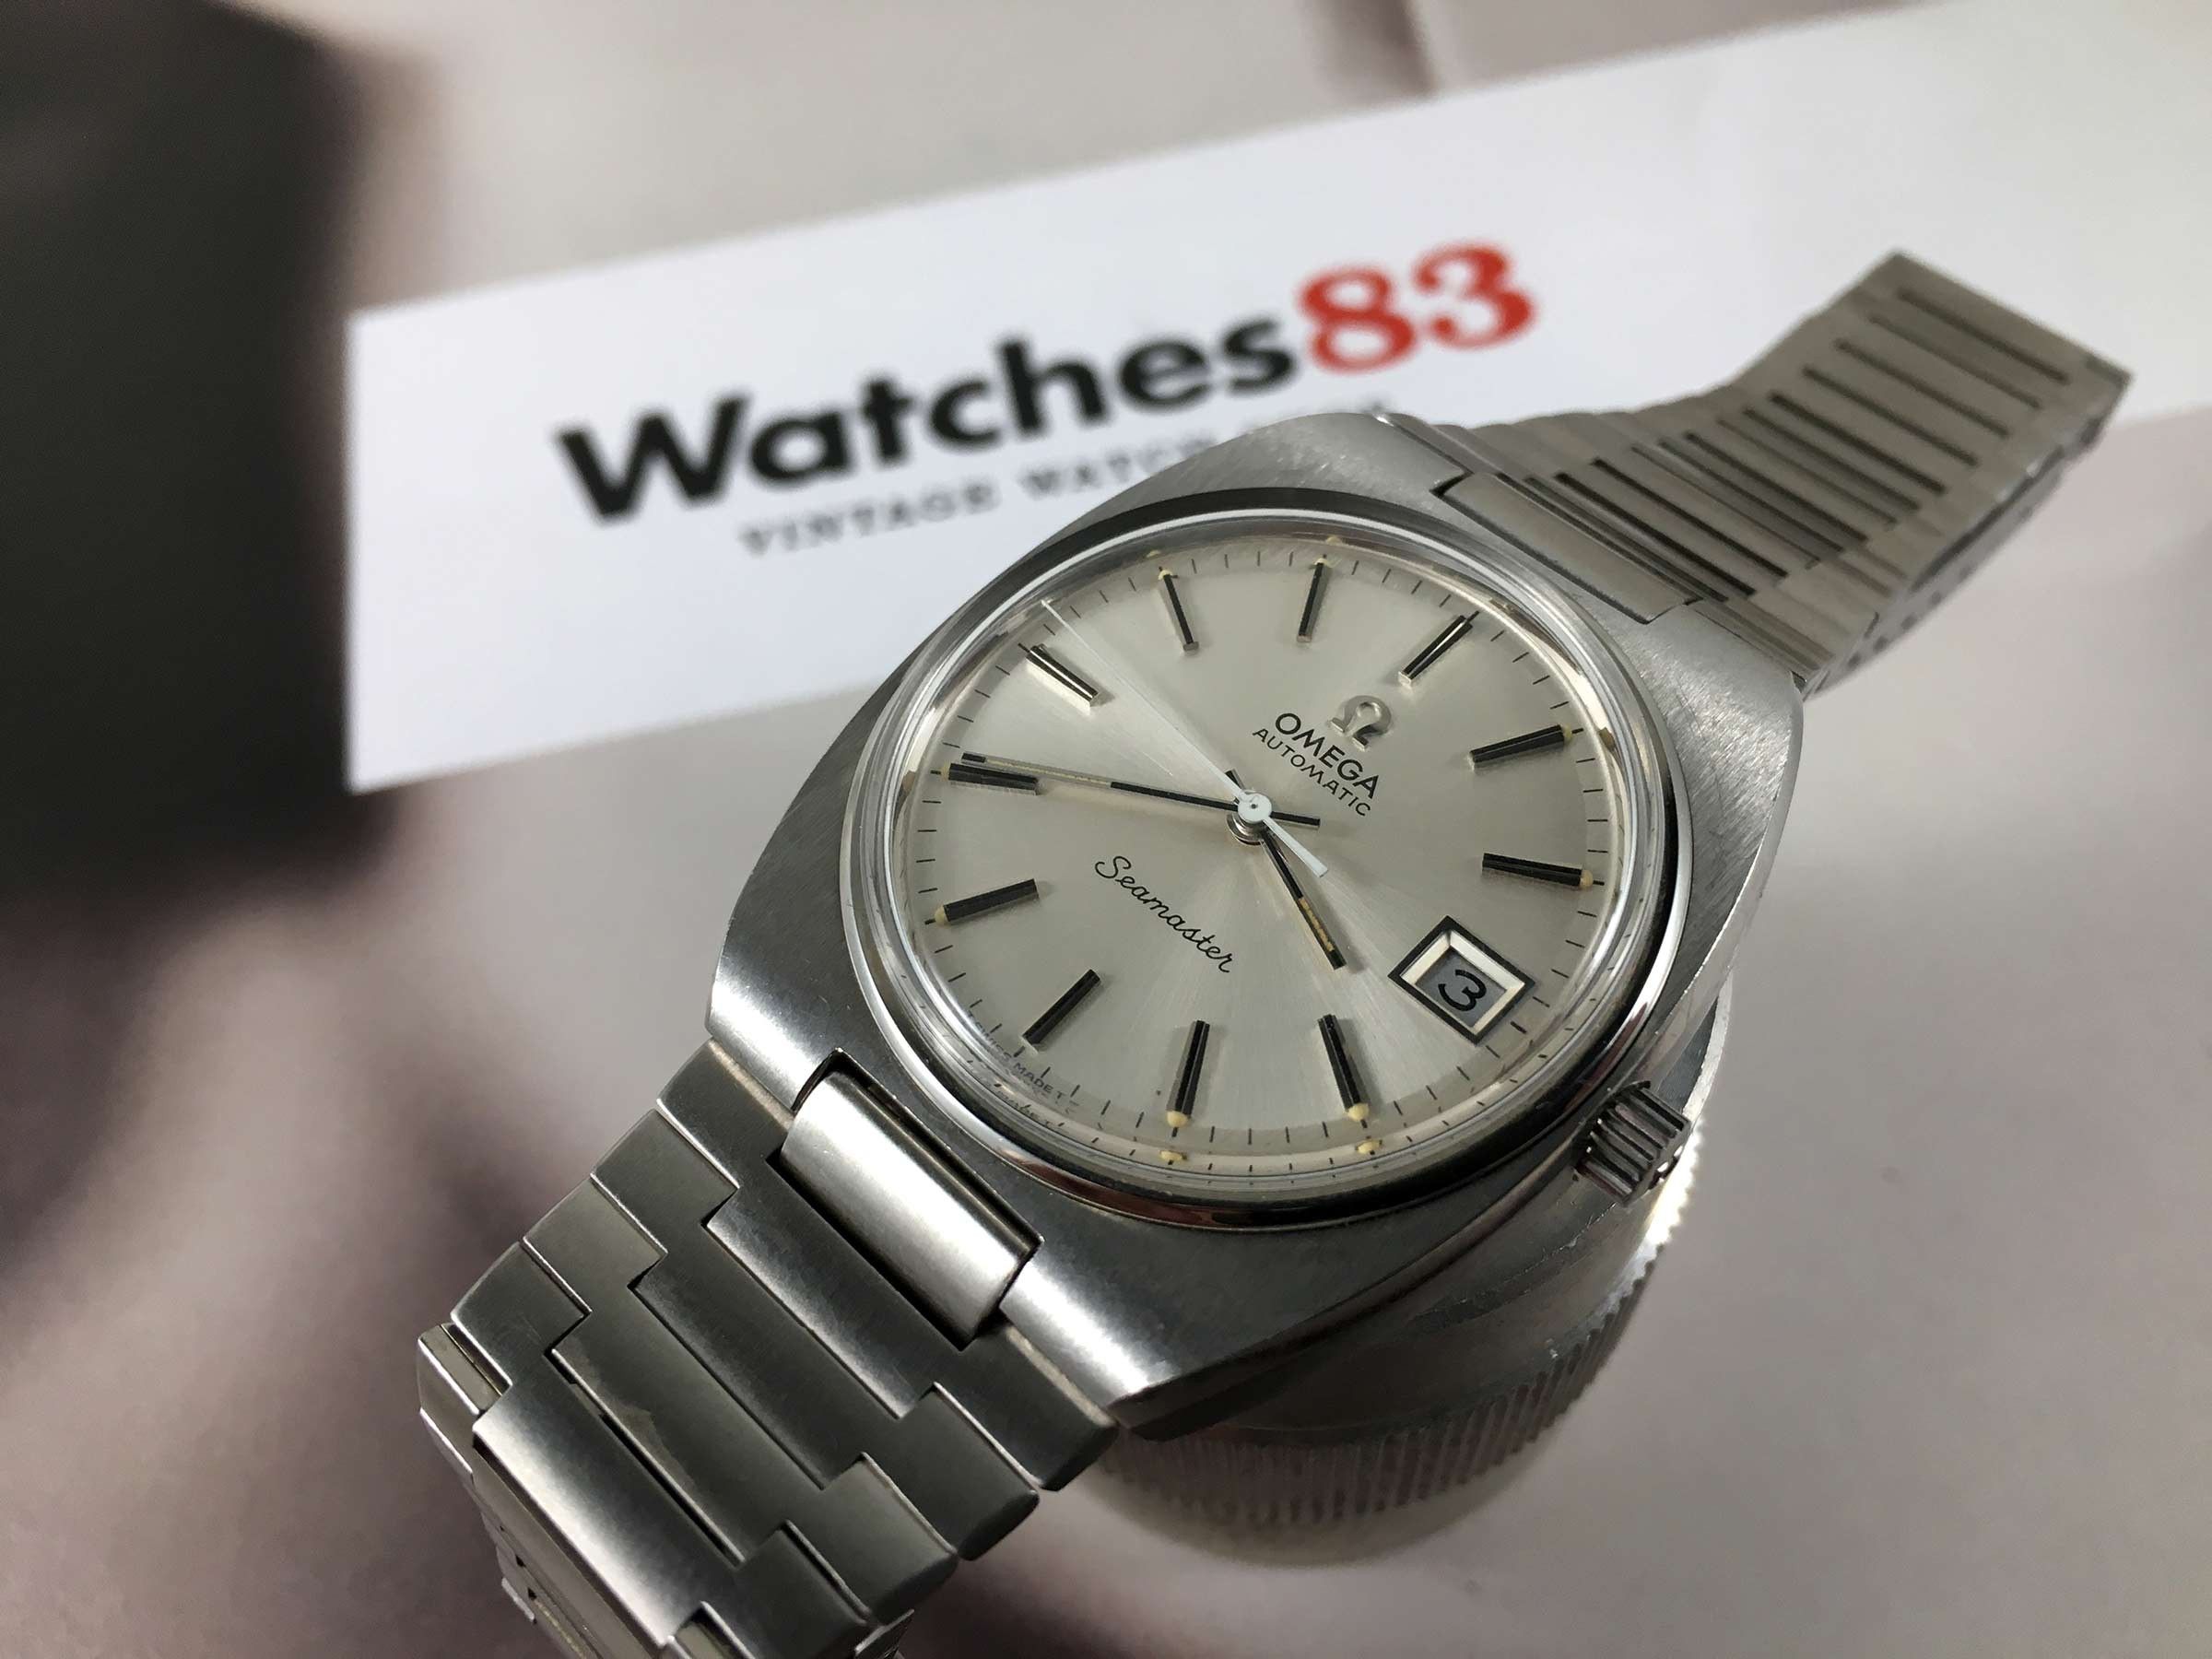 NOS Omega Seamaster Vintage swiss automatic watch Ref 166.0206 / 366. ...